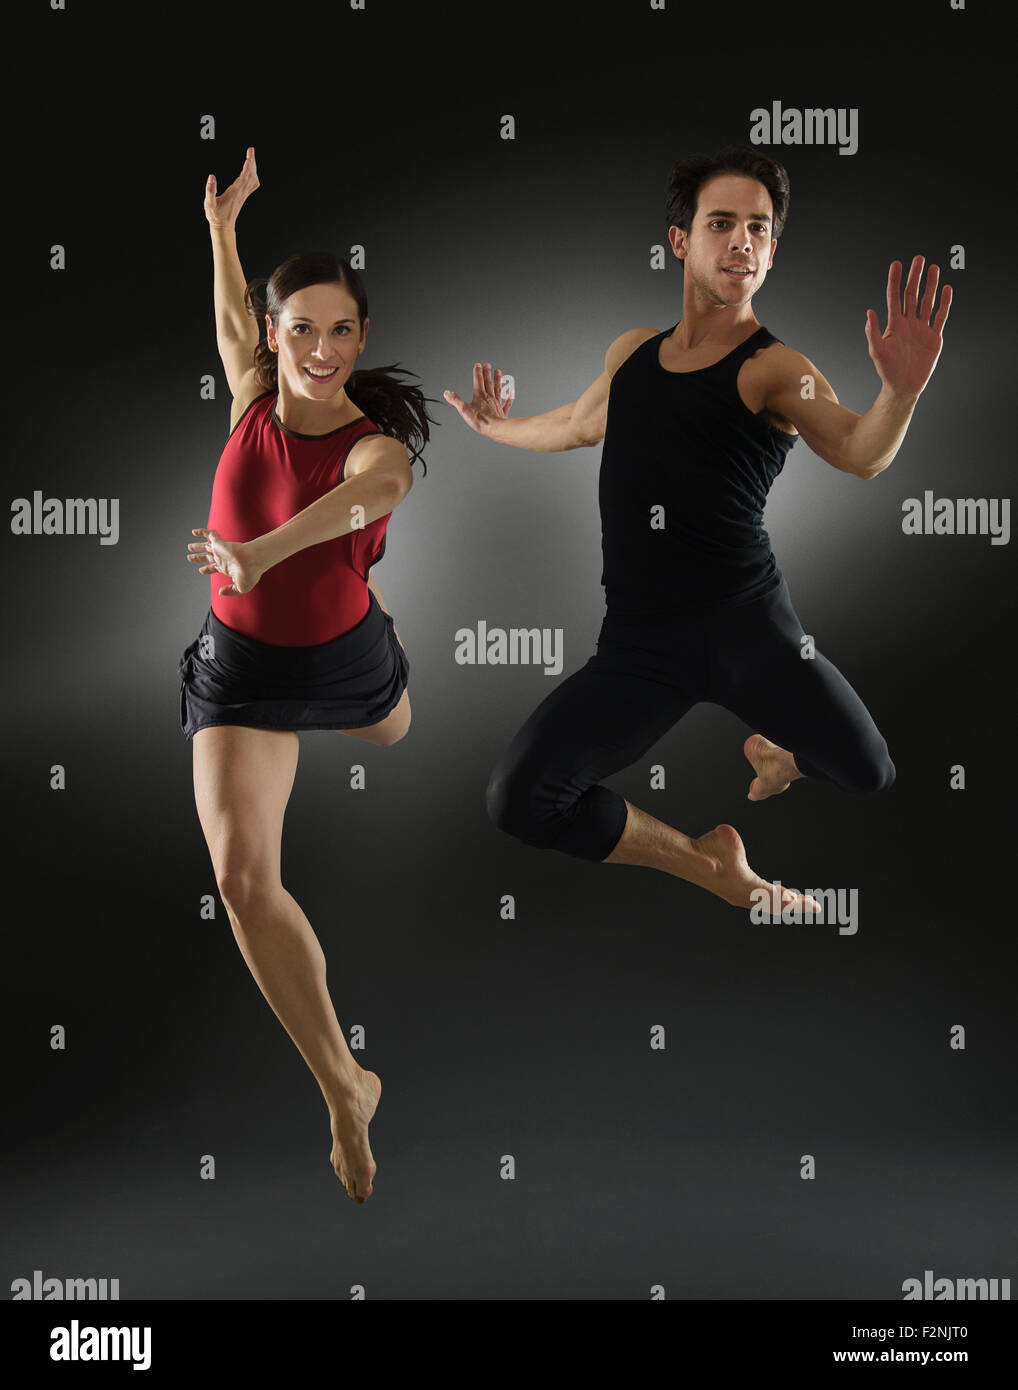 Hispanic dancers leaping in mid-air Stock Photo